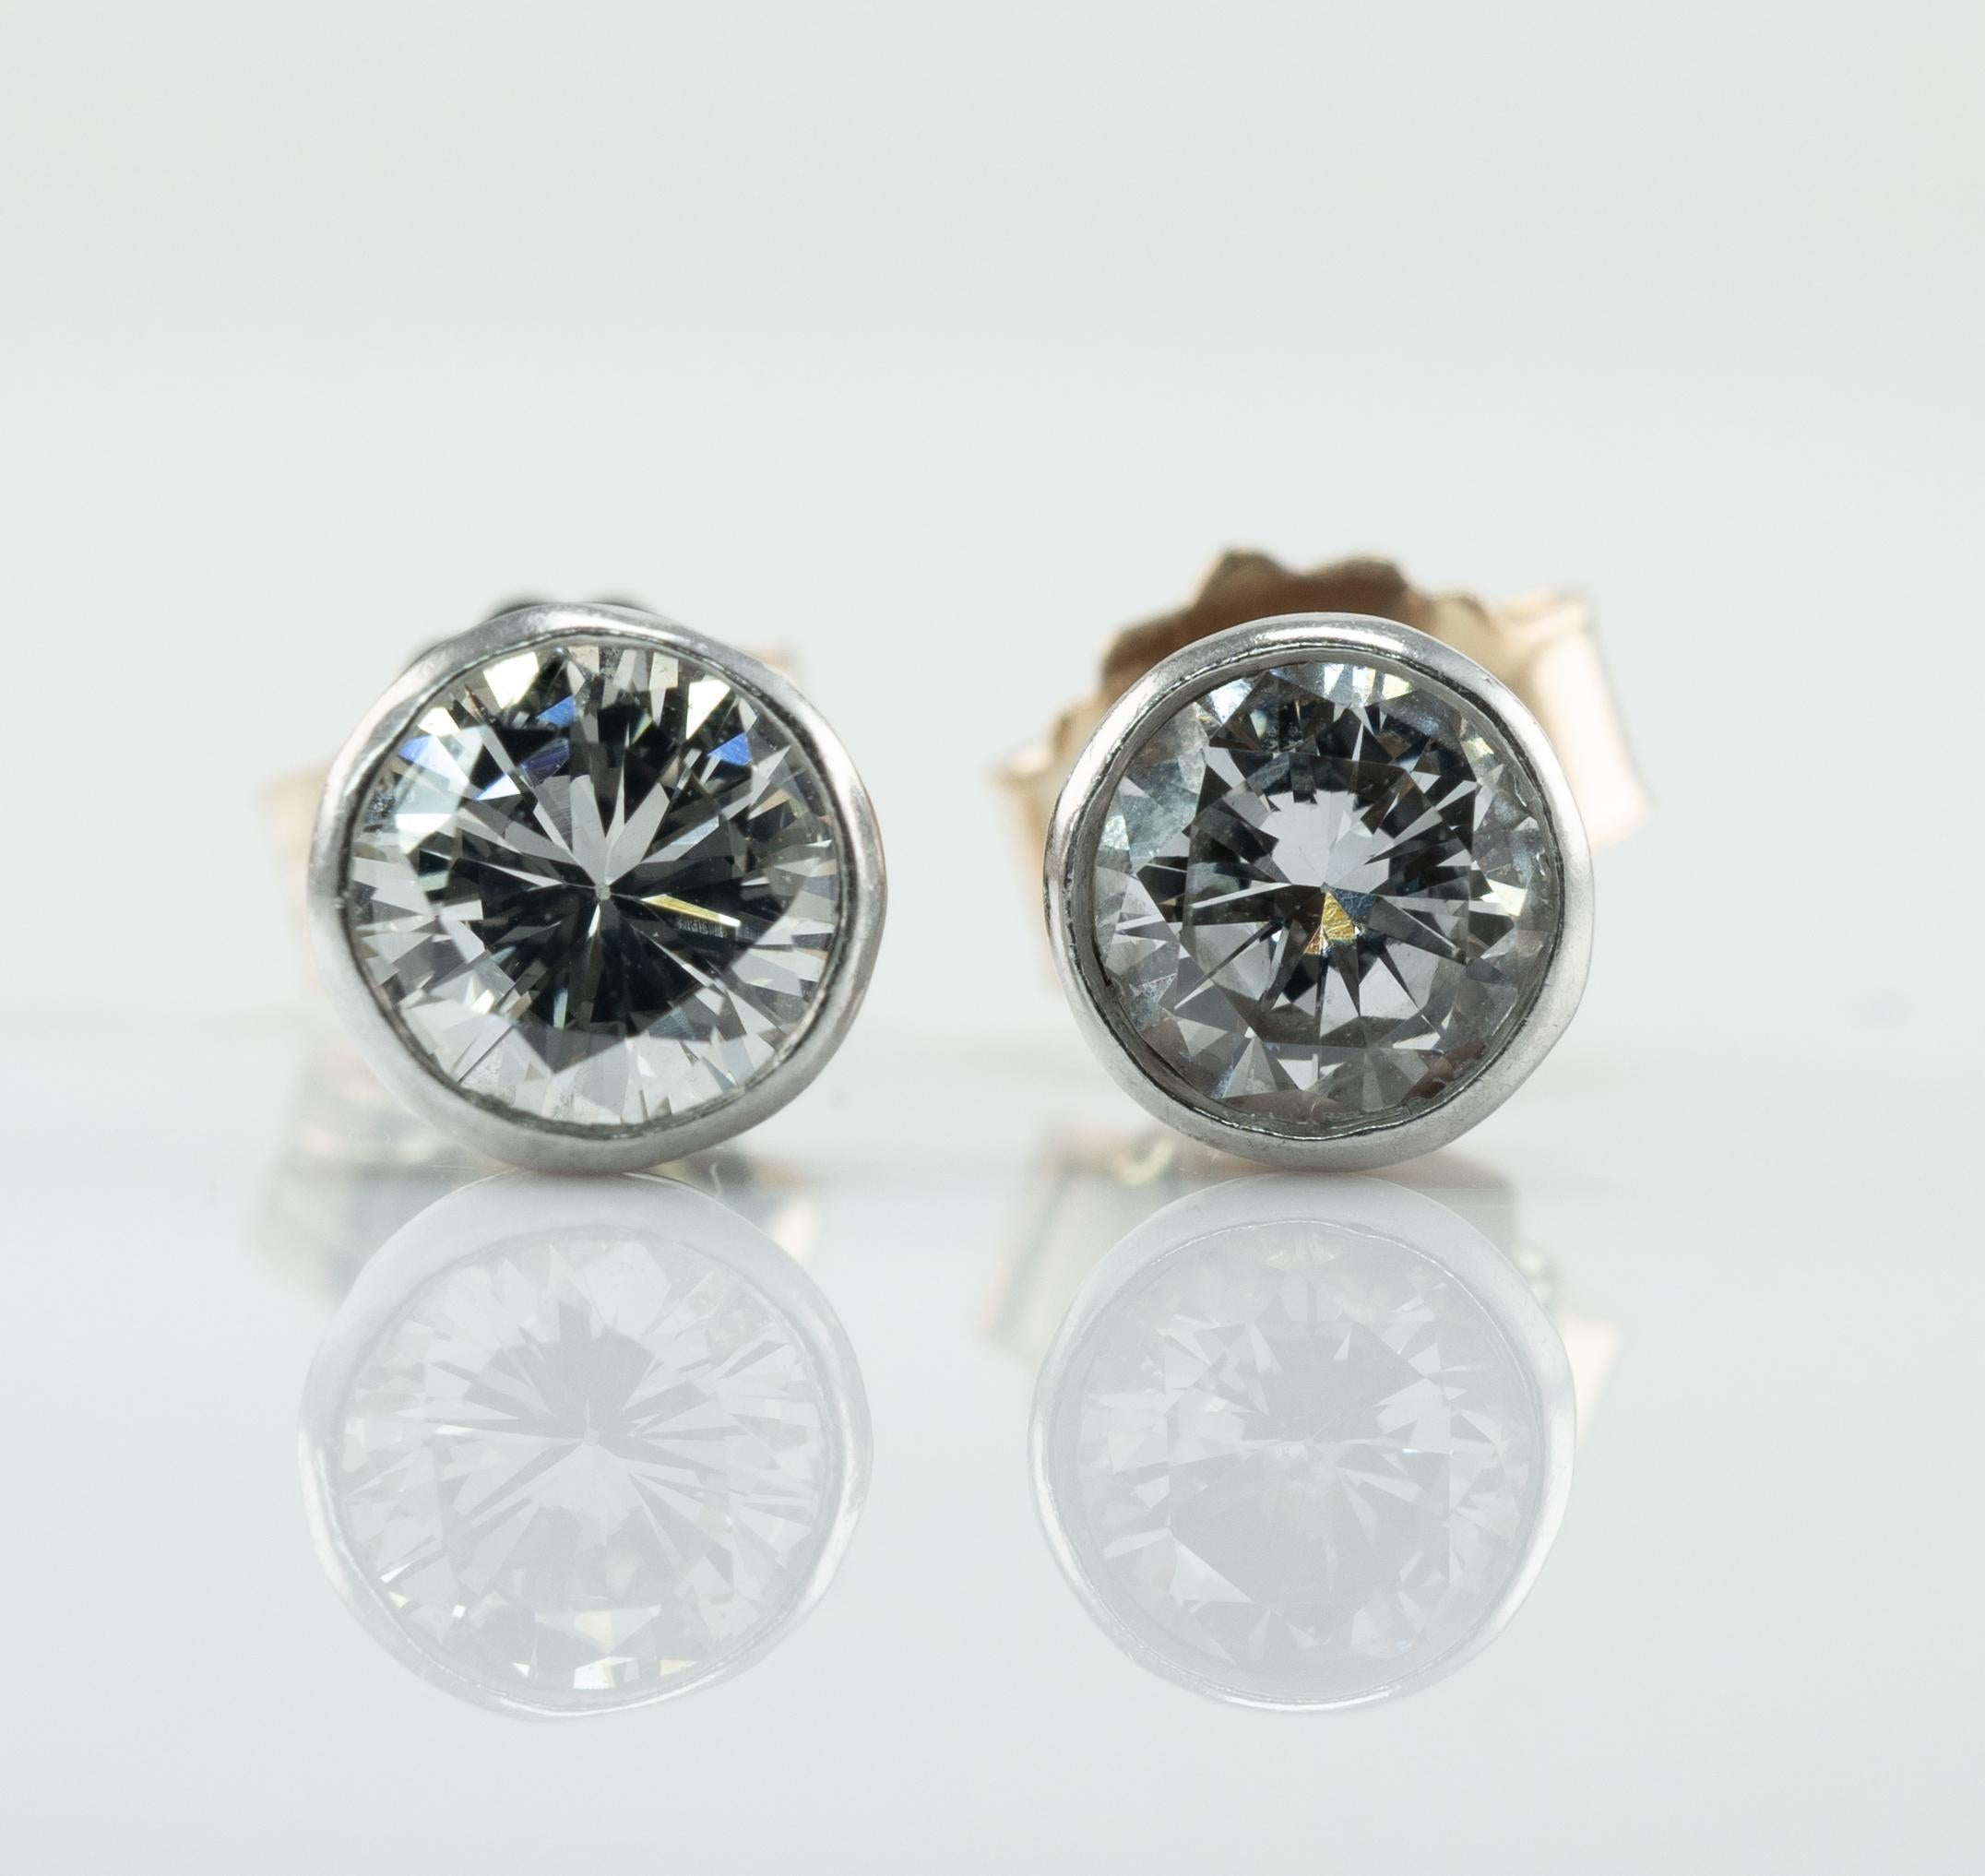 Natural Diamond Earrings Studs .60 CTW 14K White Gold Bezel

These round brilliant cut bezel diamond earrings studs are crafted in solid 14K White gold. Each diamond is .30 carat. One diamond is SI1 clarity and H color. Another diamond is VS1